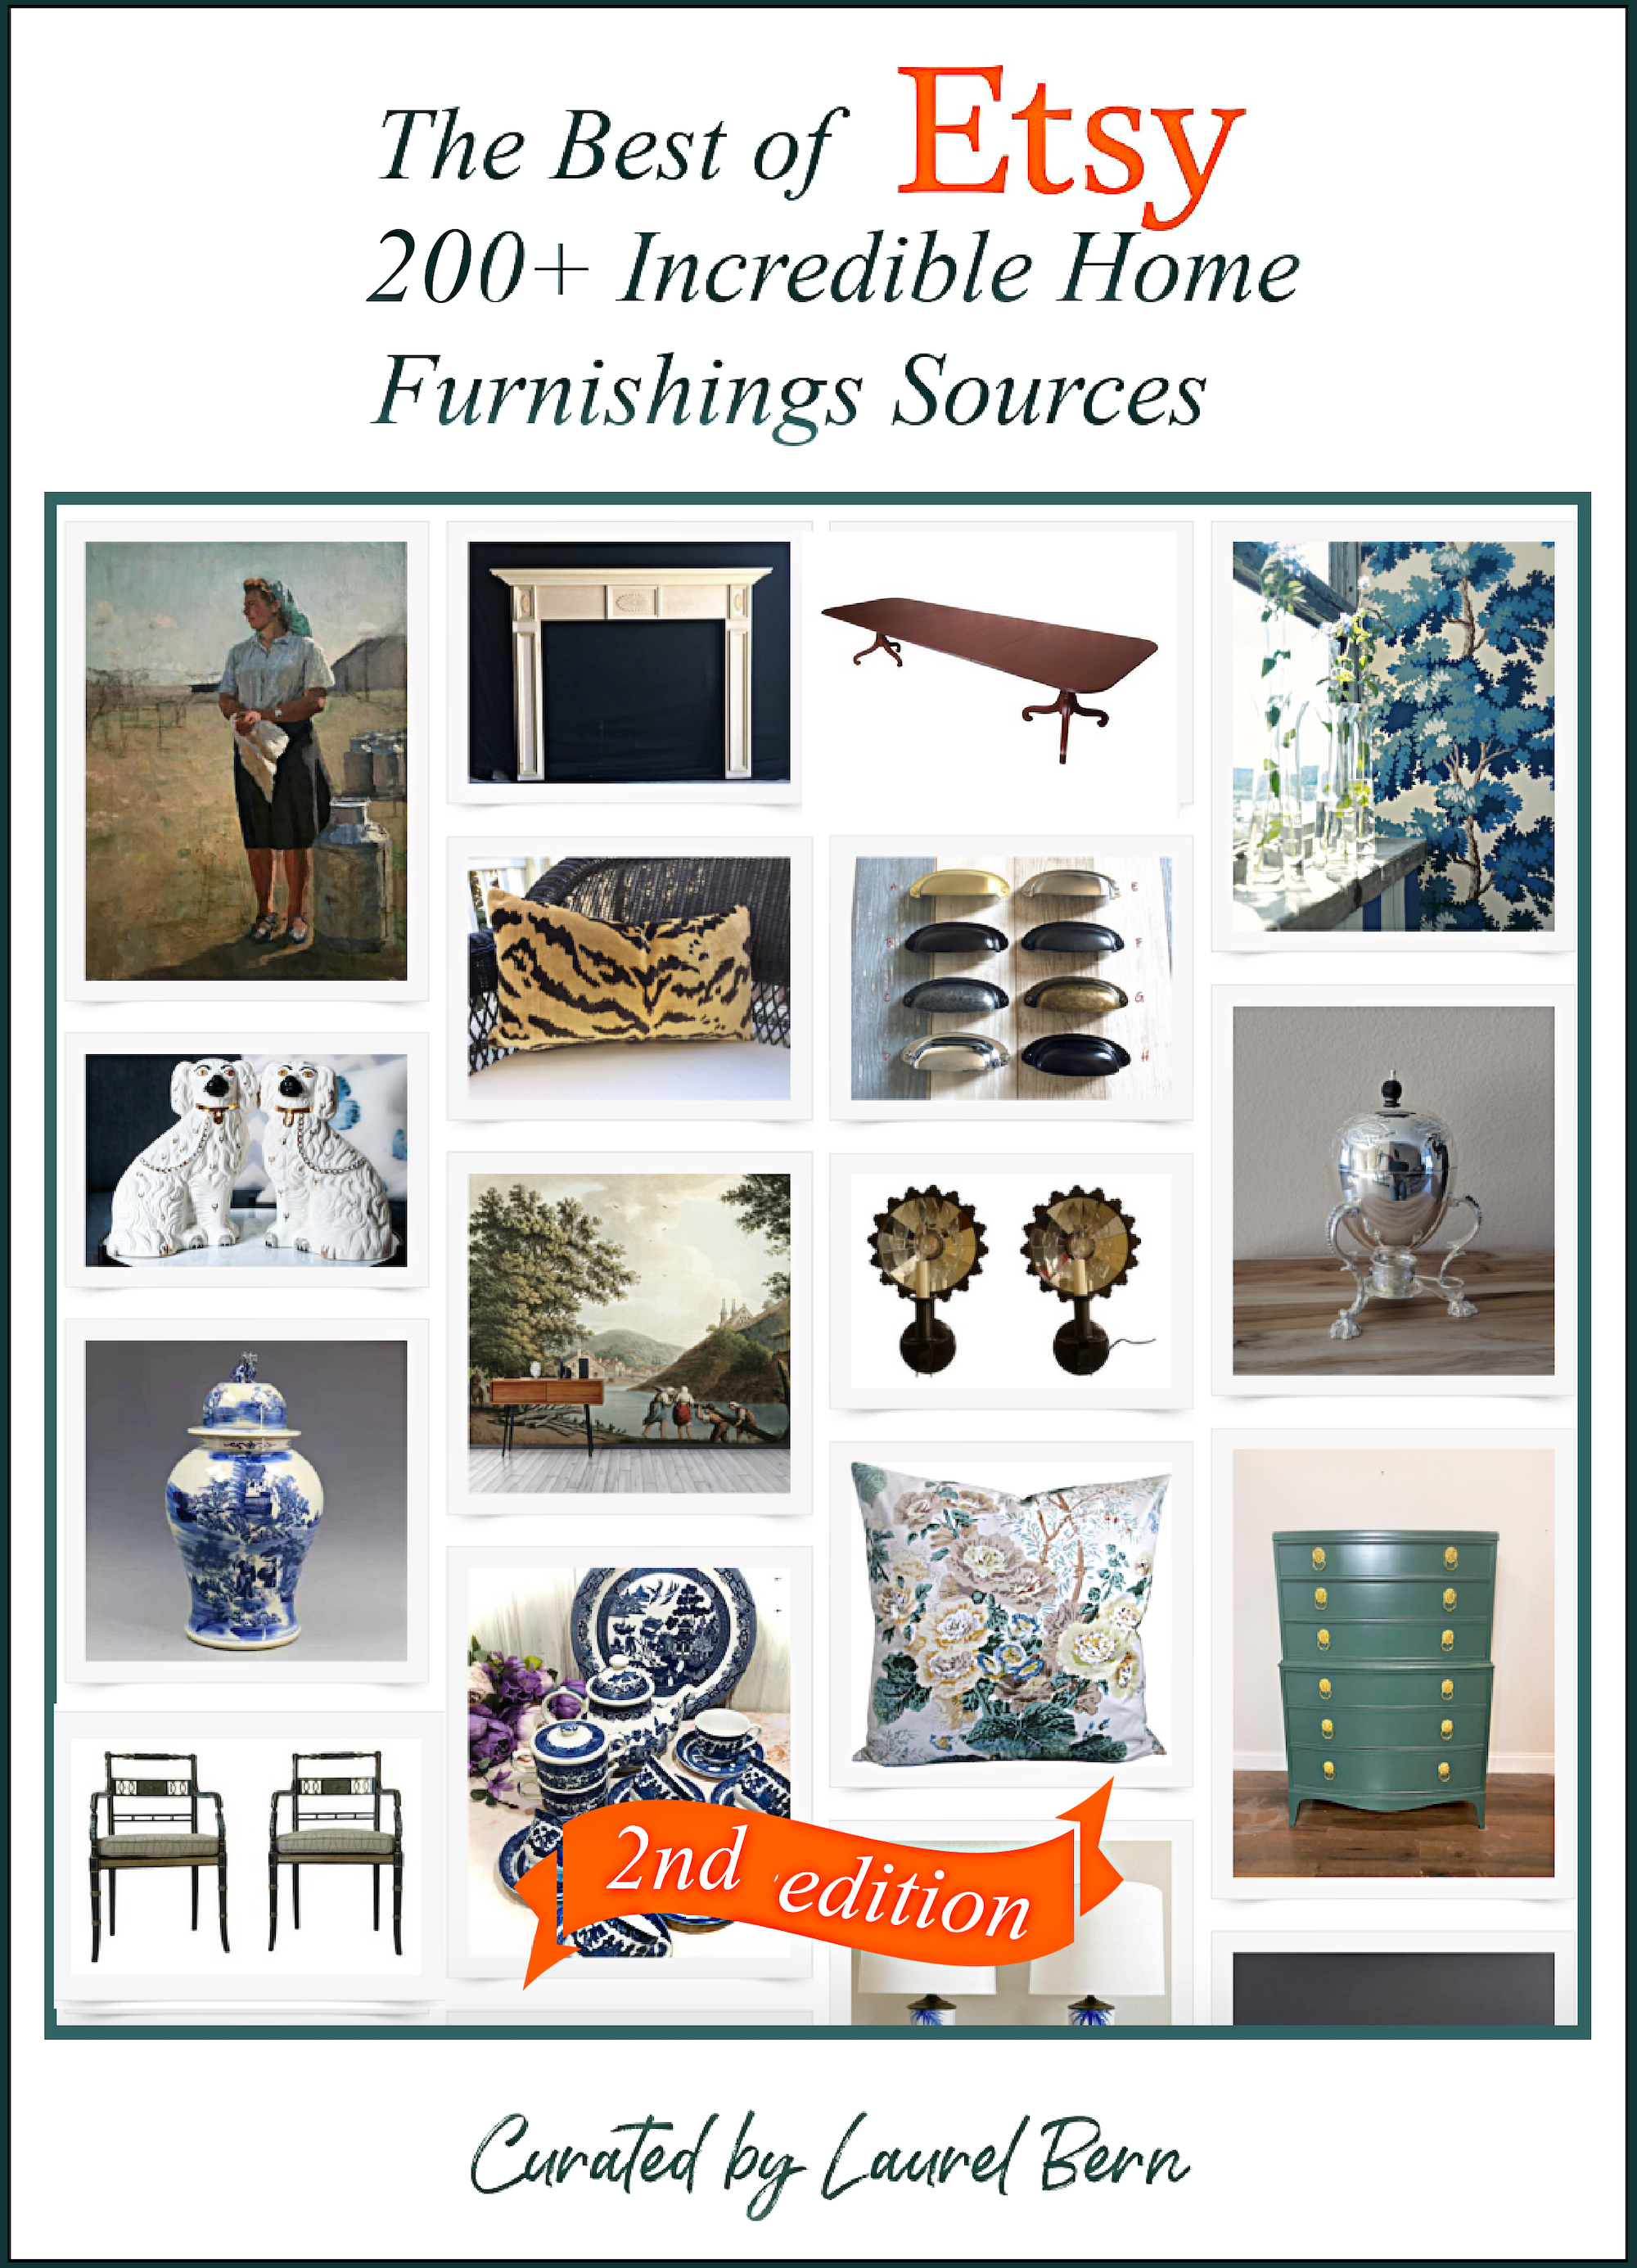 The Best of Etsy 200+ Incredible Home Furnishing Sources